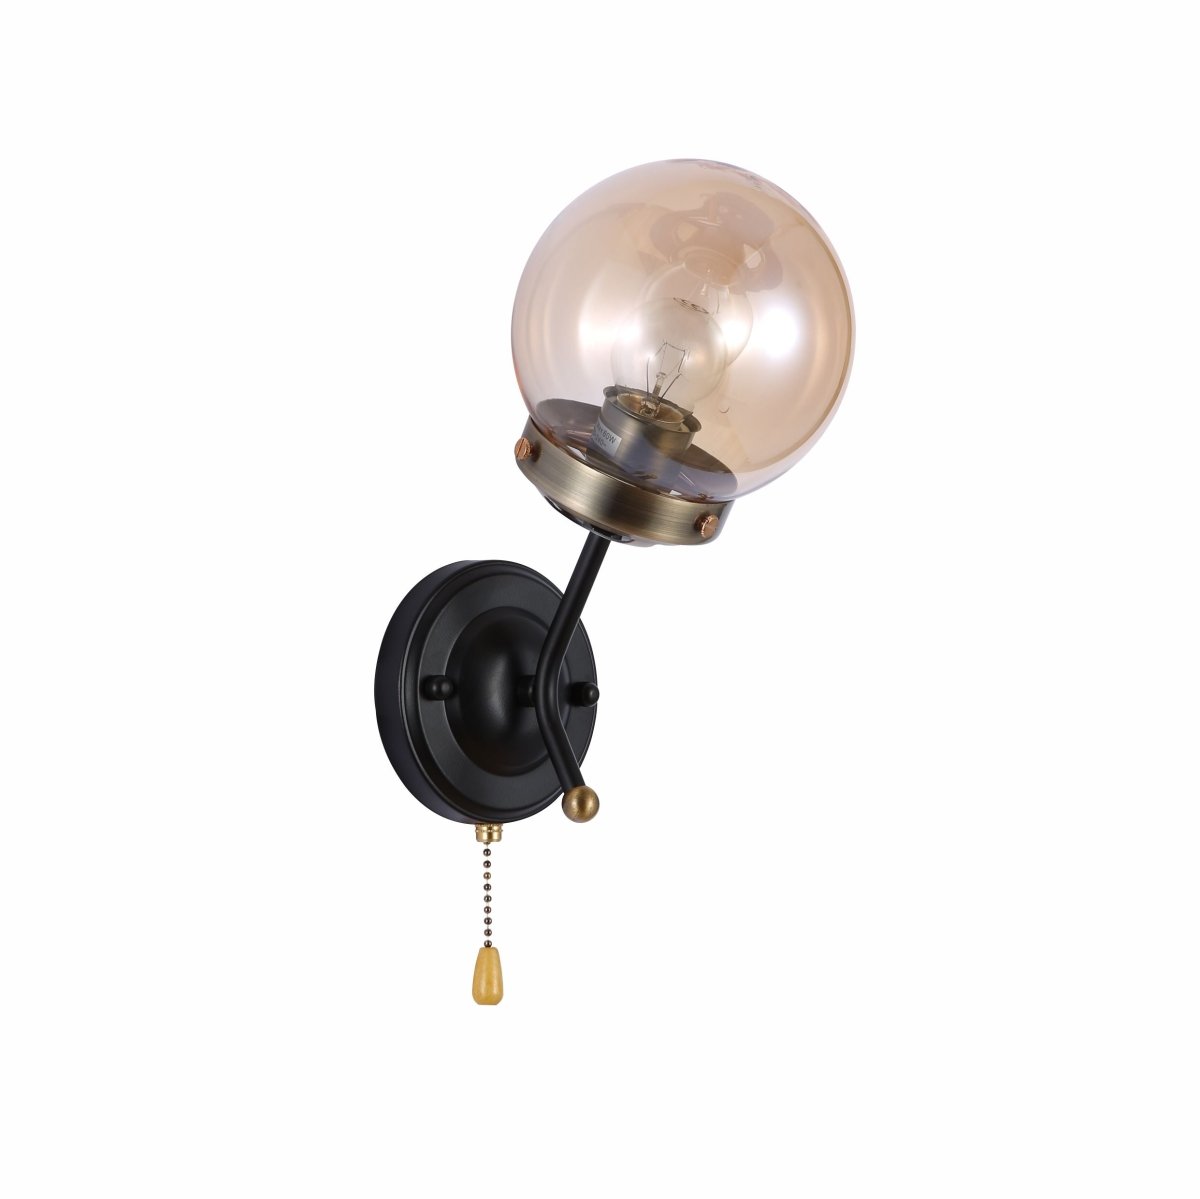 Amber Glass Antique Brass And Black Globe Wall Light E27 And Pull Down Switch's main image.